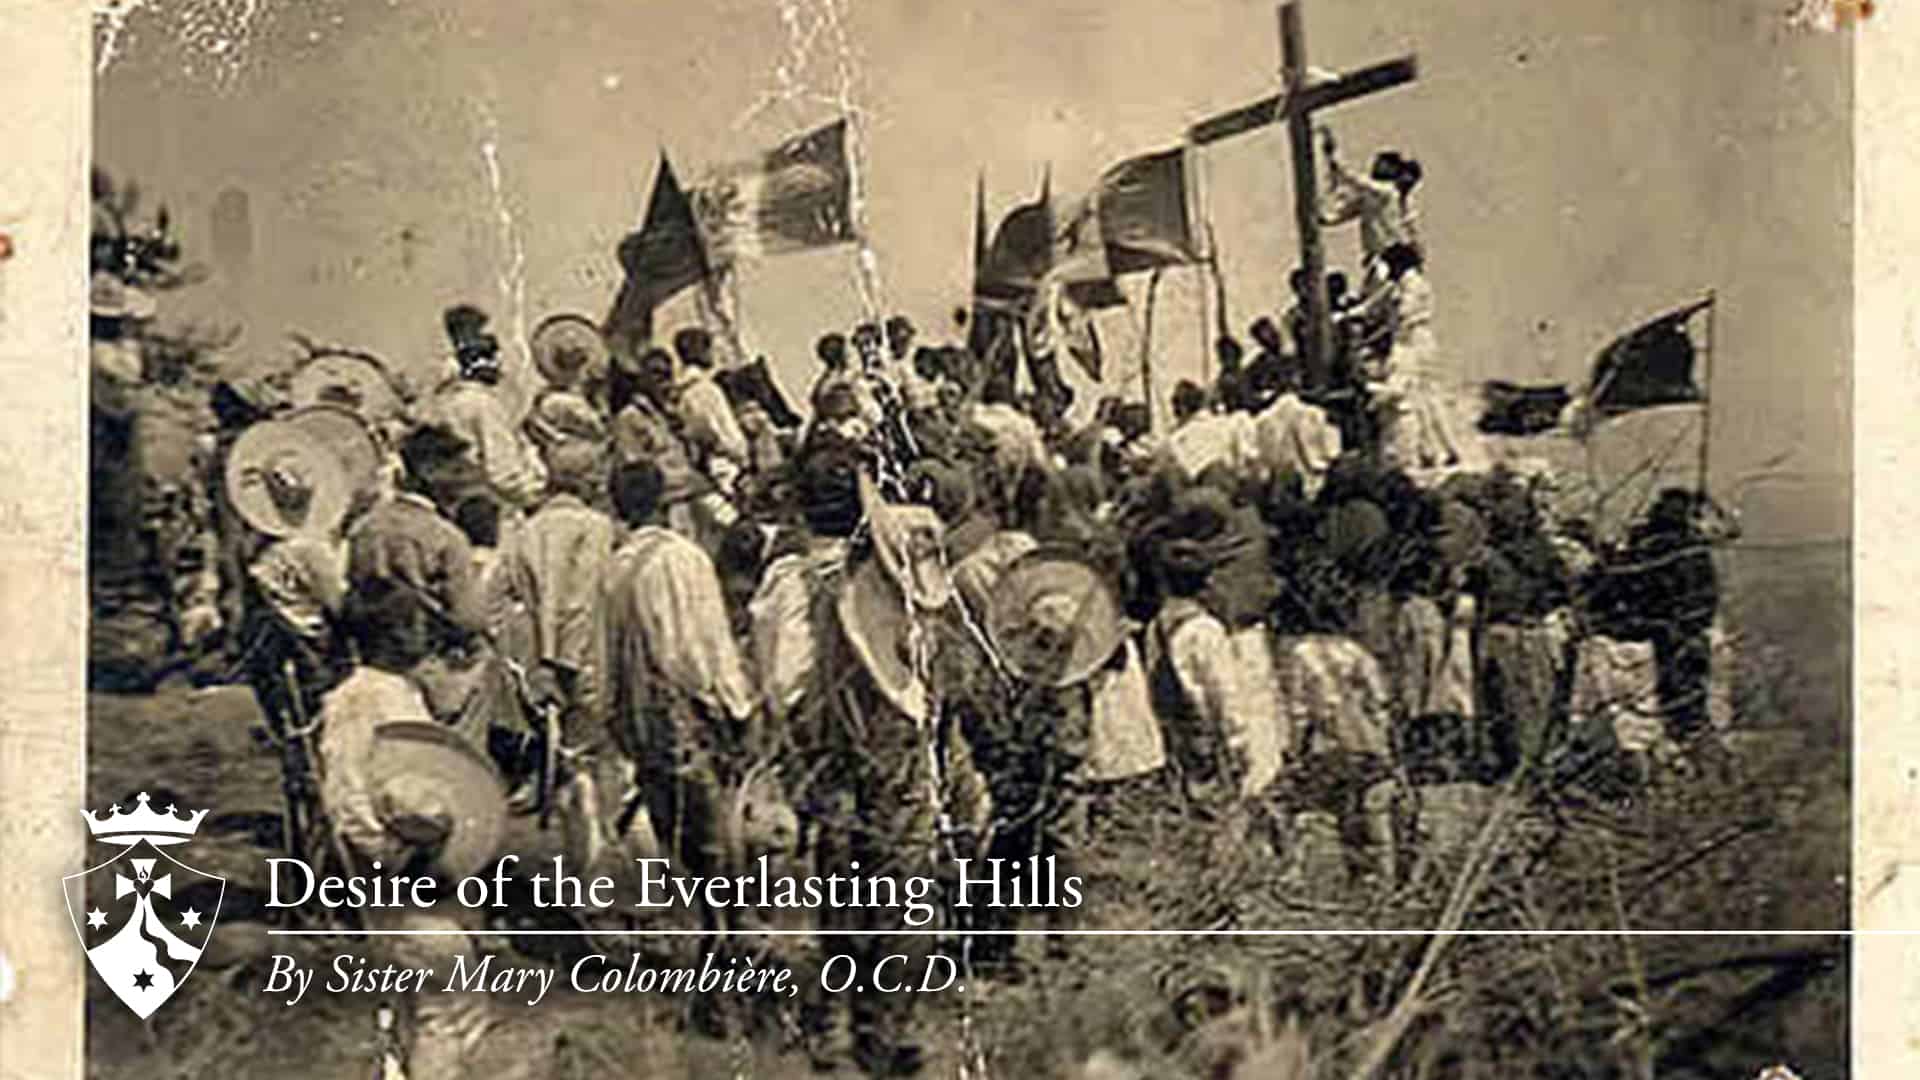 Image of crowd on hill with flags and cross, 'Desire of the Everlasting Hills, By Sister Mary Colombiere, O.C.D.'